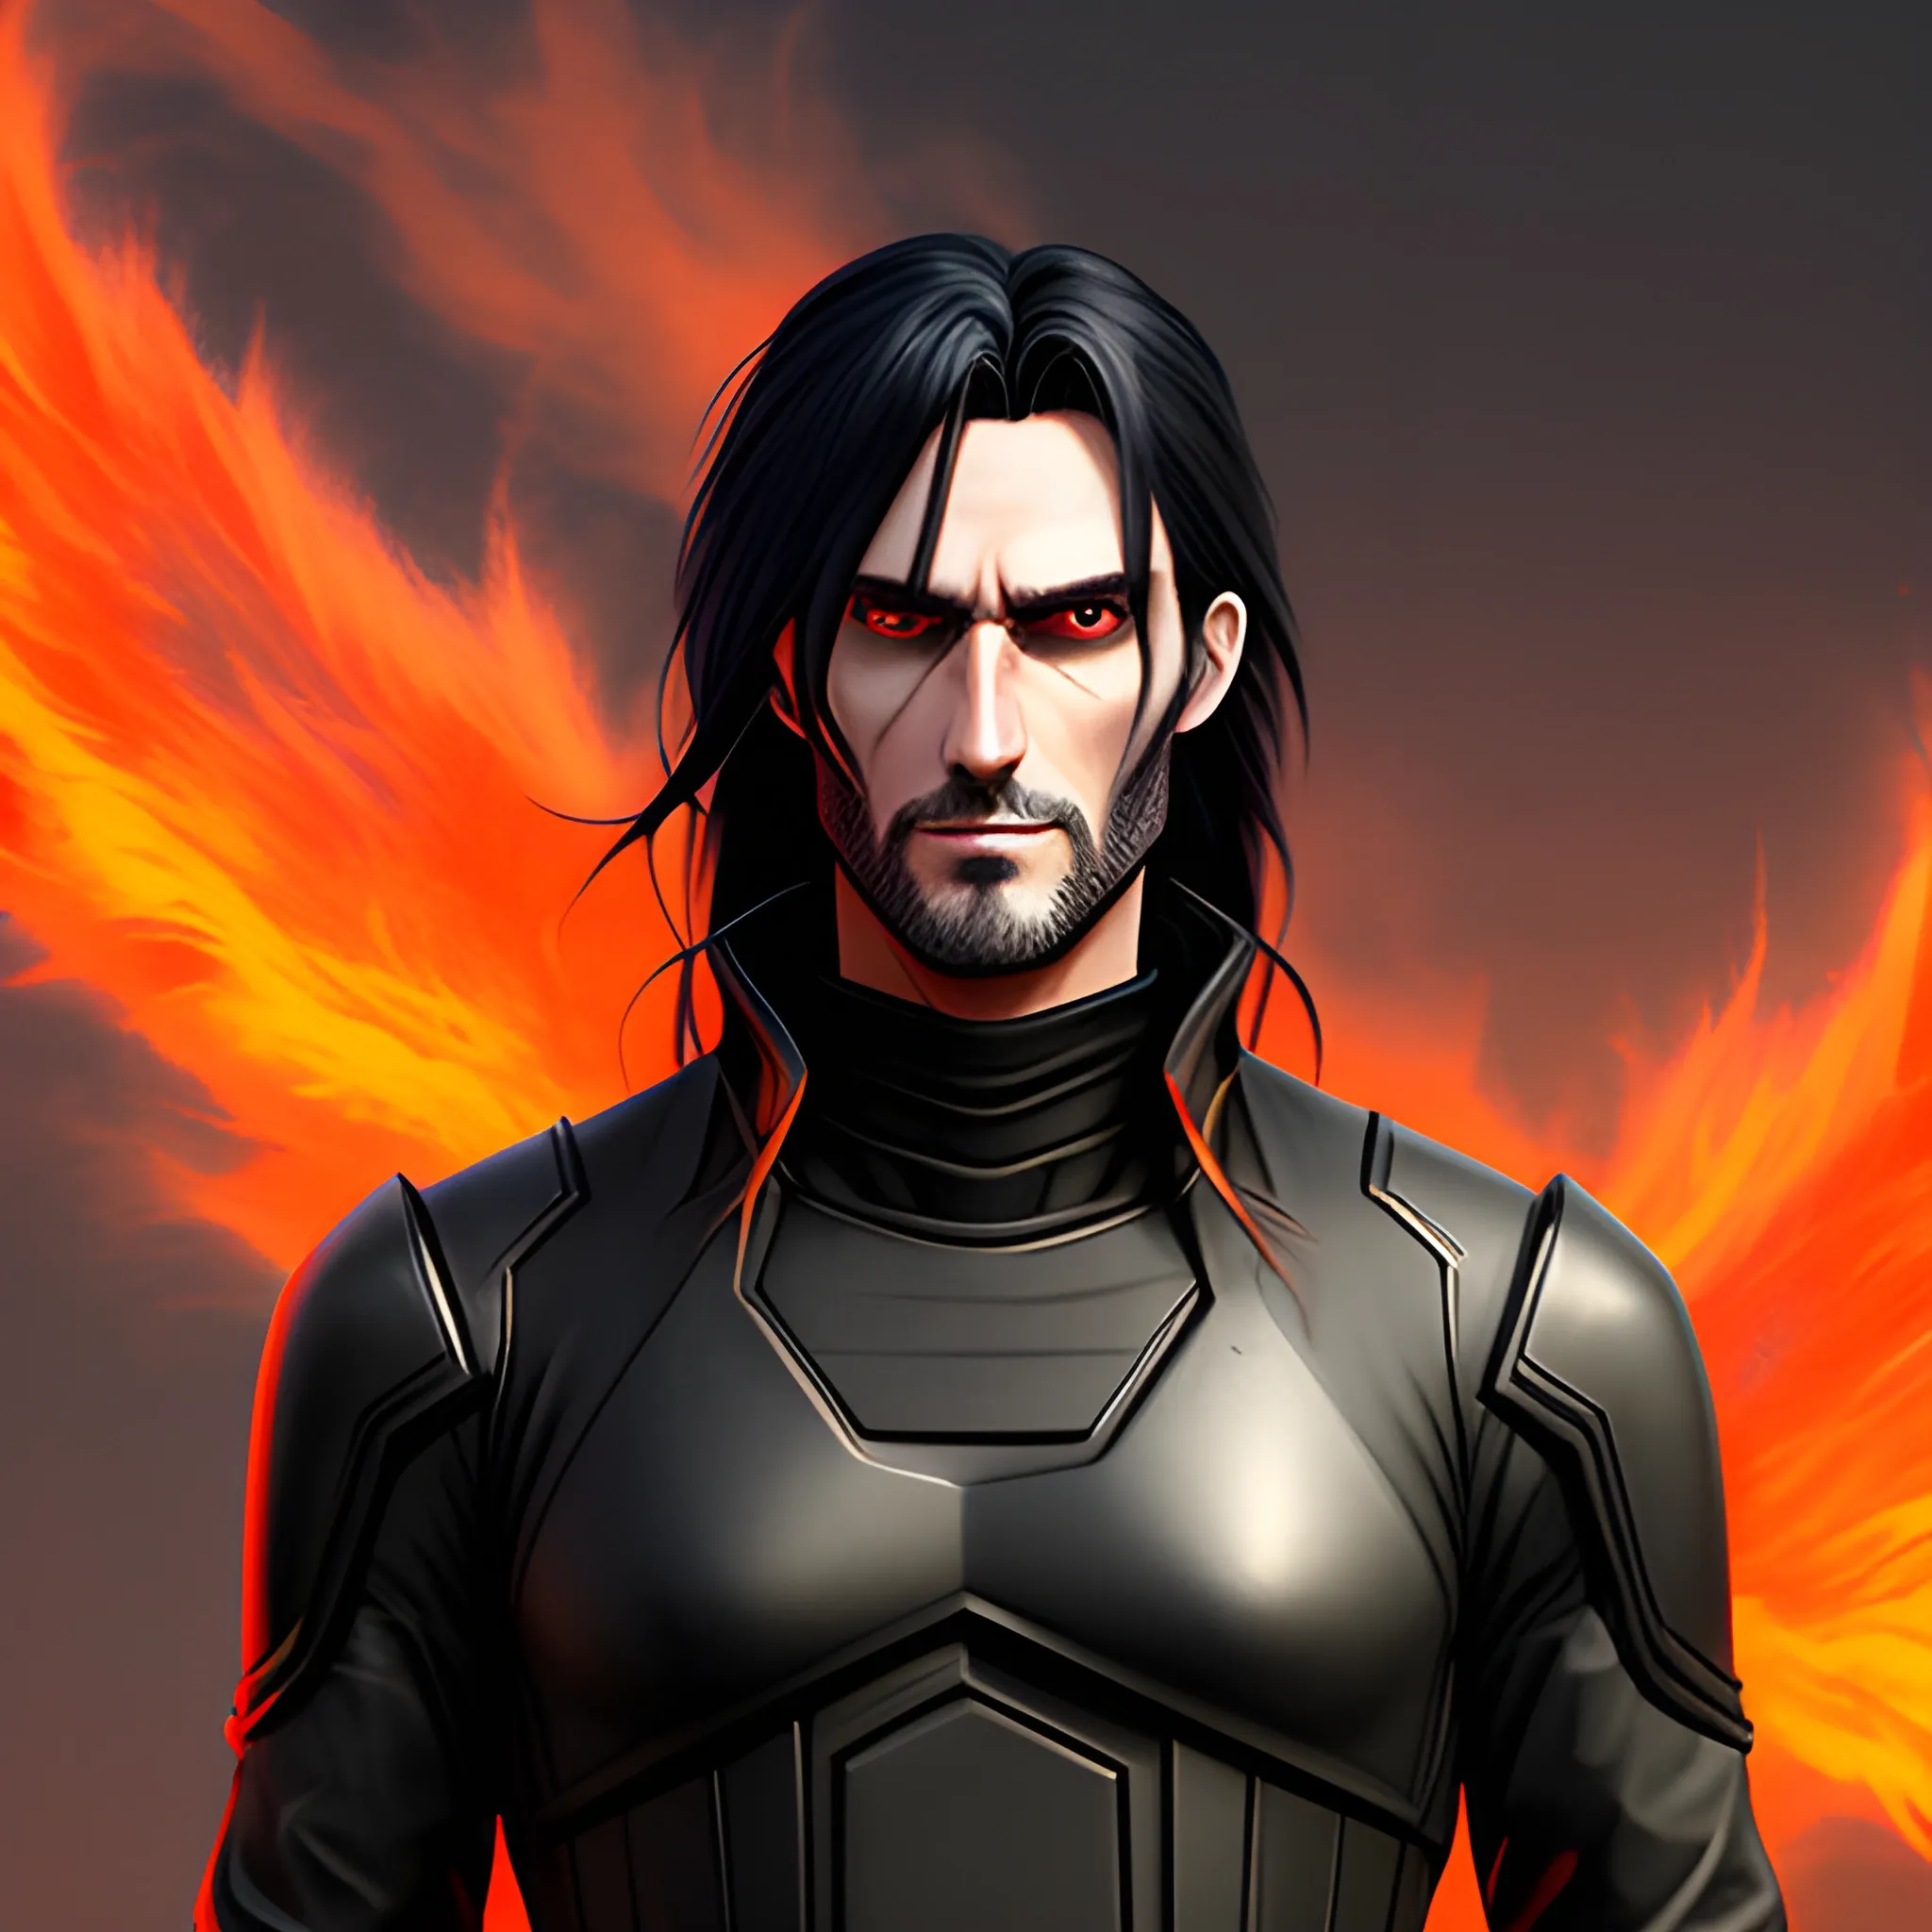 Anime boy with long dark hair and dark clothes, 3D, realistic, post-apocalyptic smoky orange gradient background